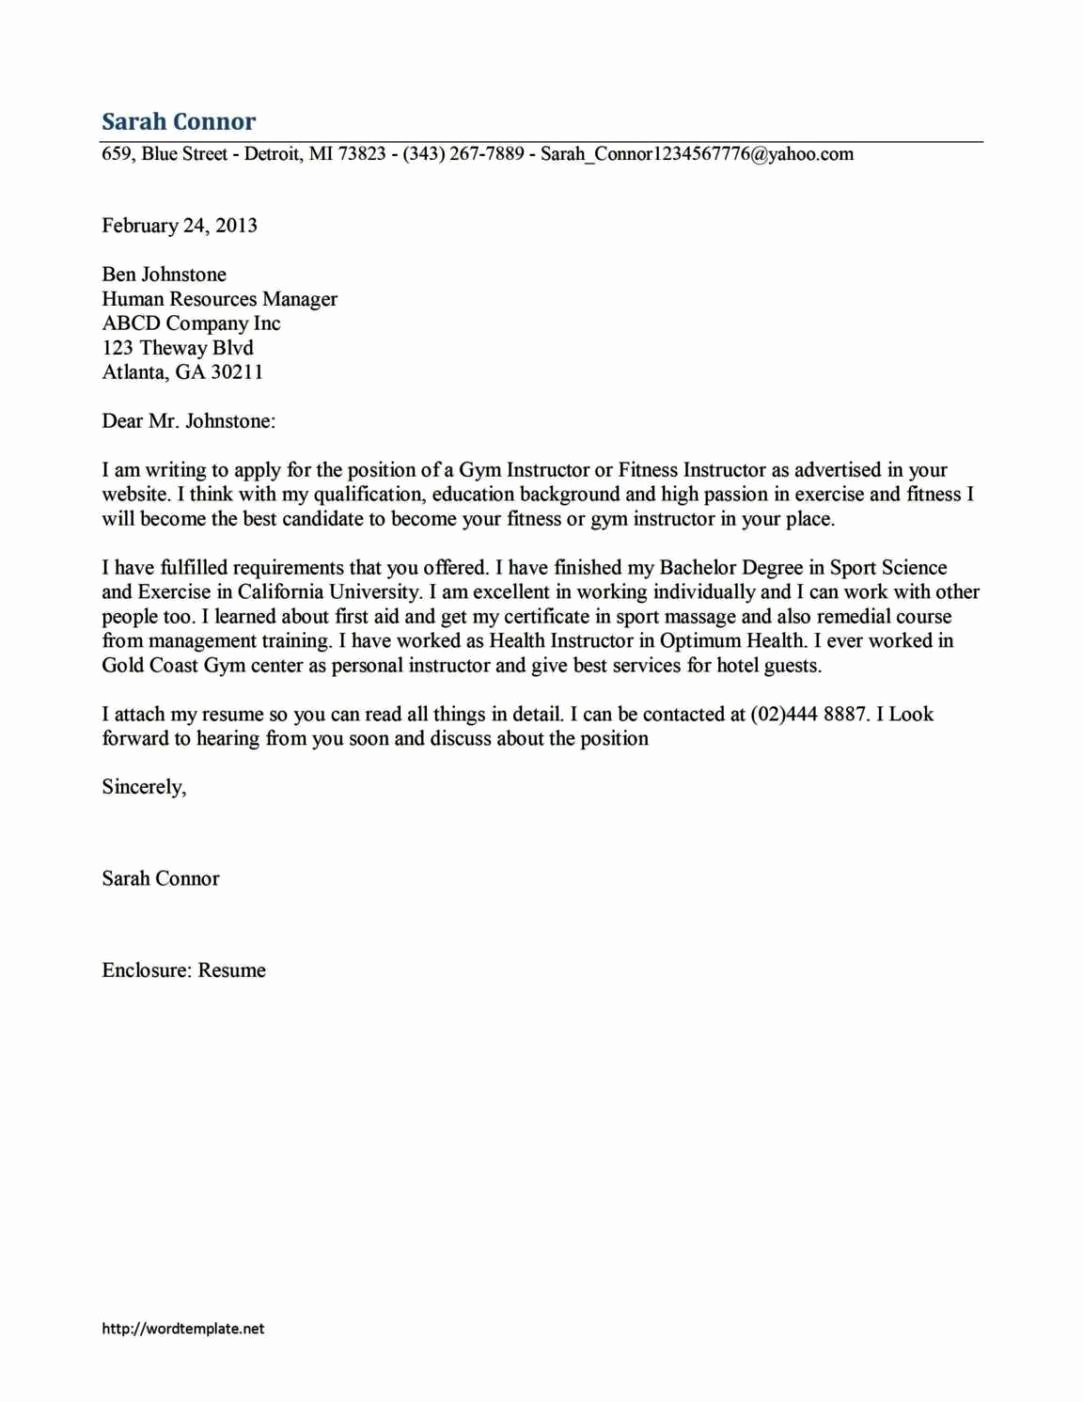 Letter Of Interest Template Free New Letter Interest Template Microsoft Word